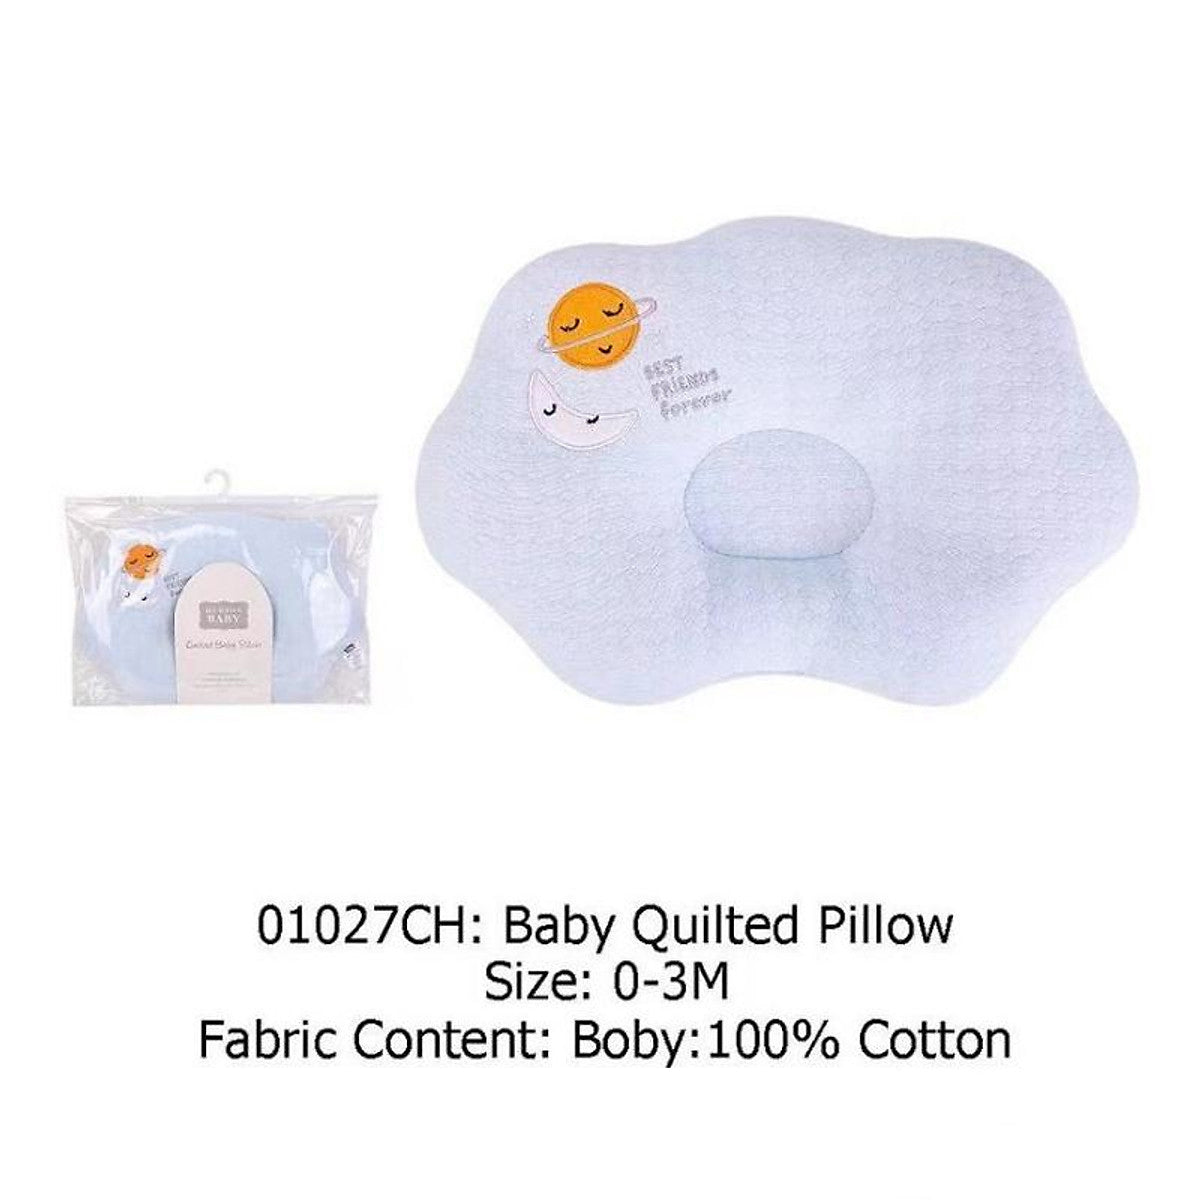 BABY QUILTED PILLOW - 26958